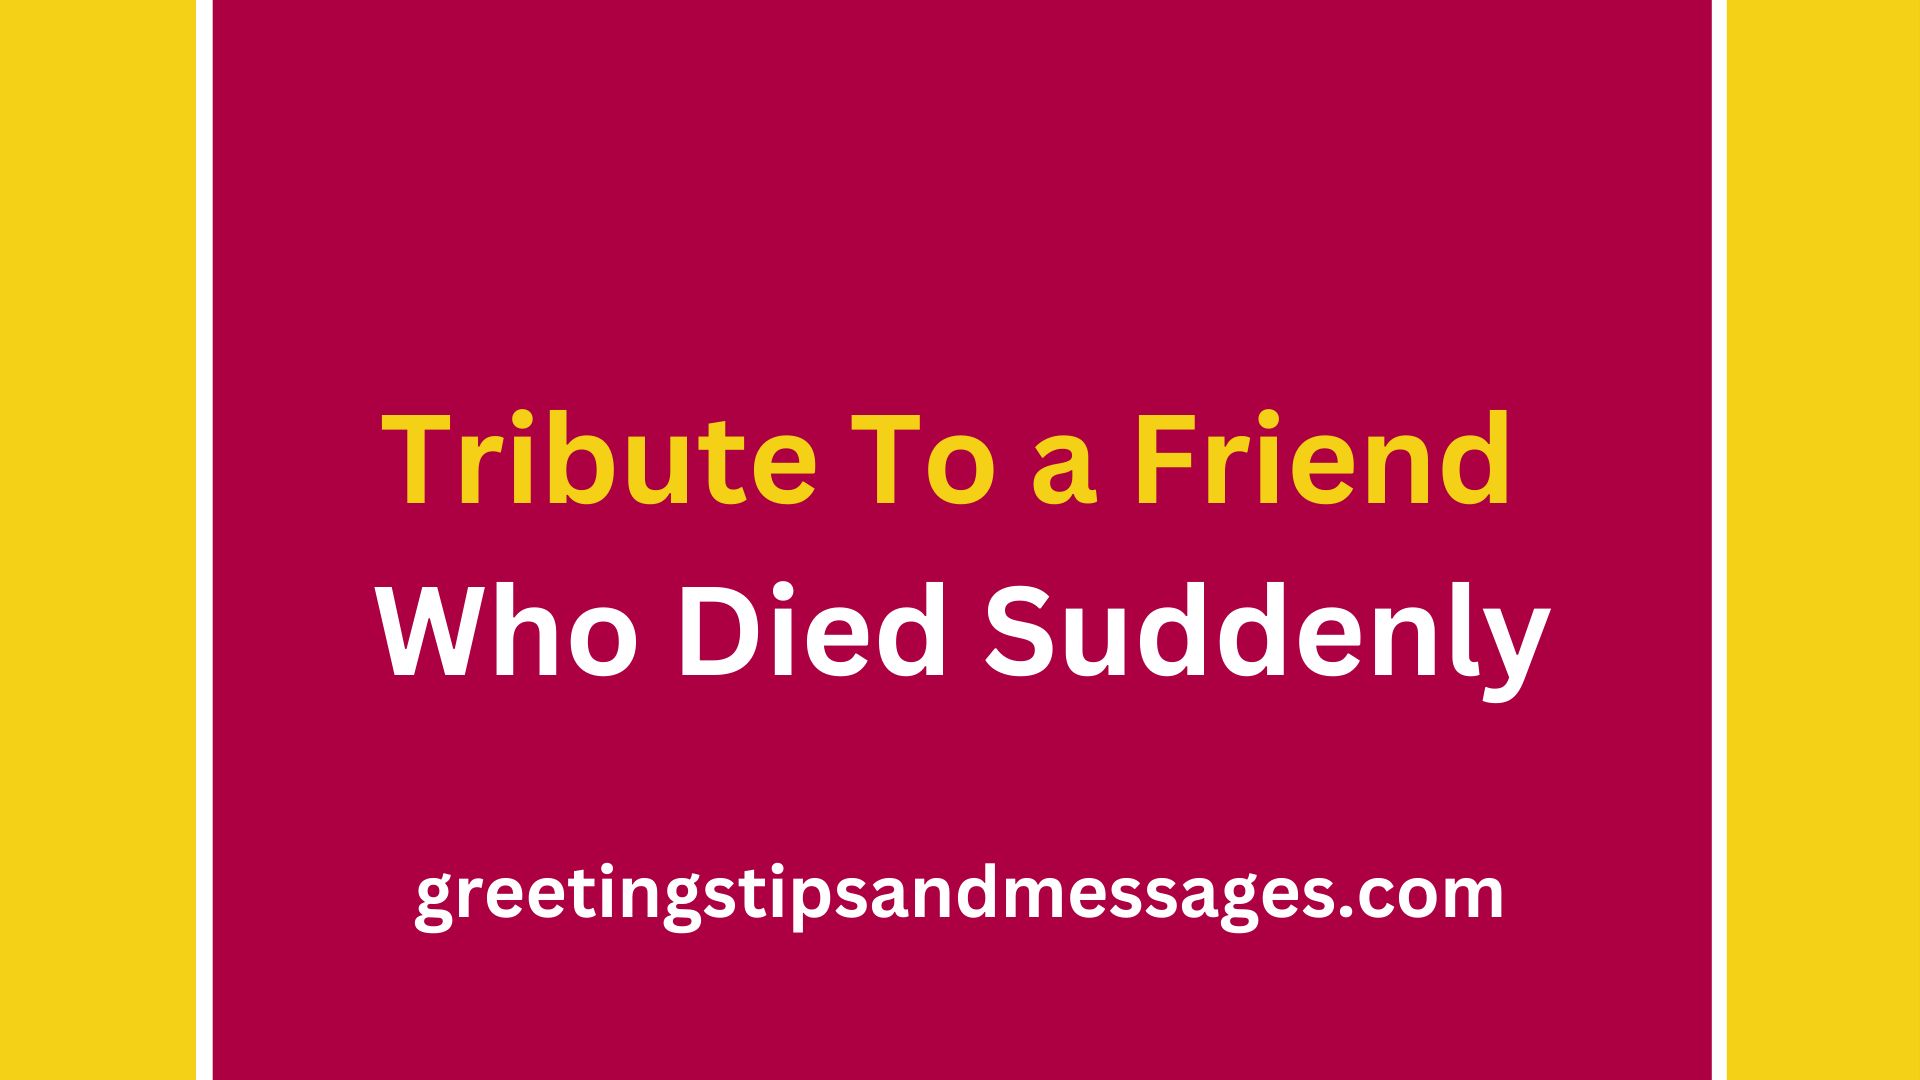 Tribute To a Friend Who Died Suddenly